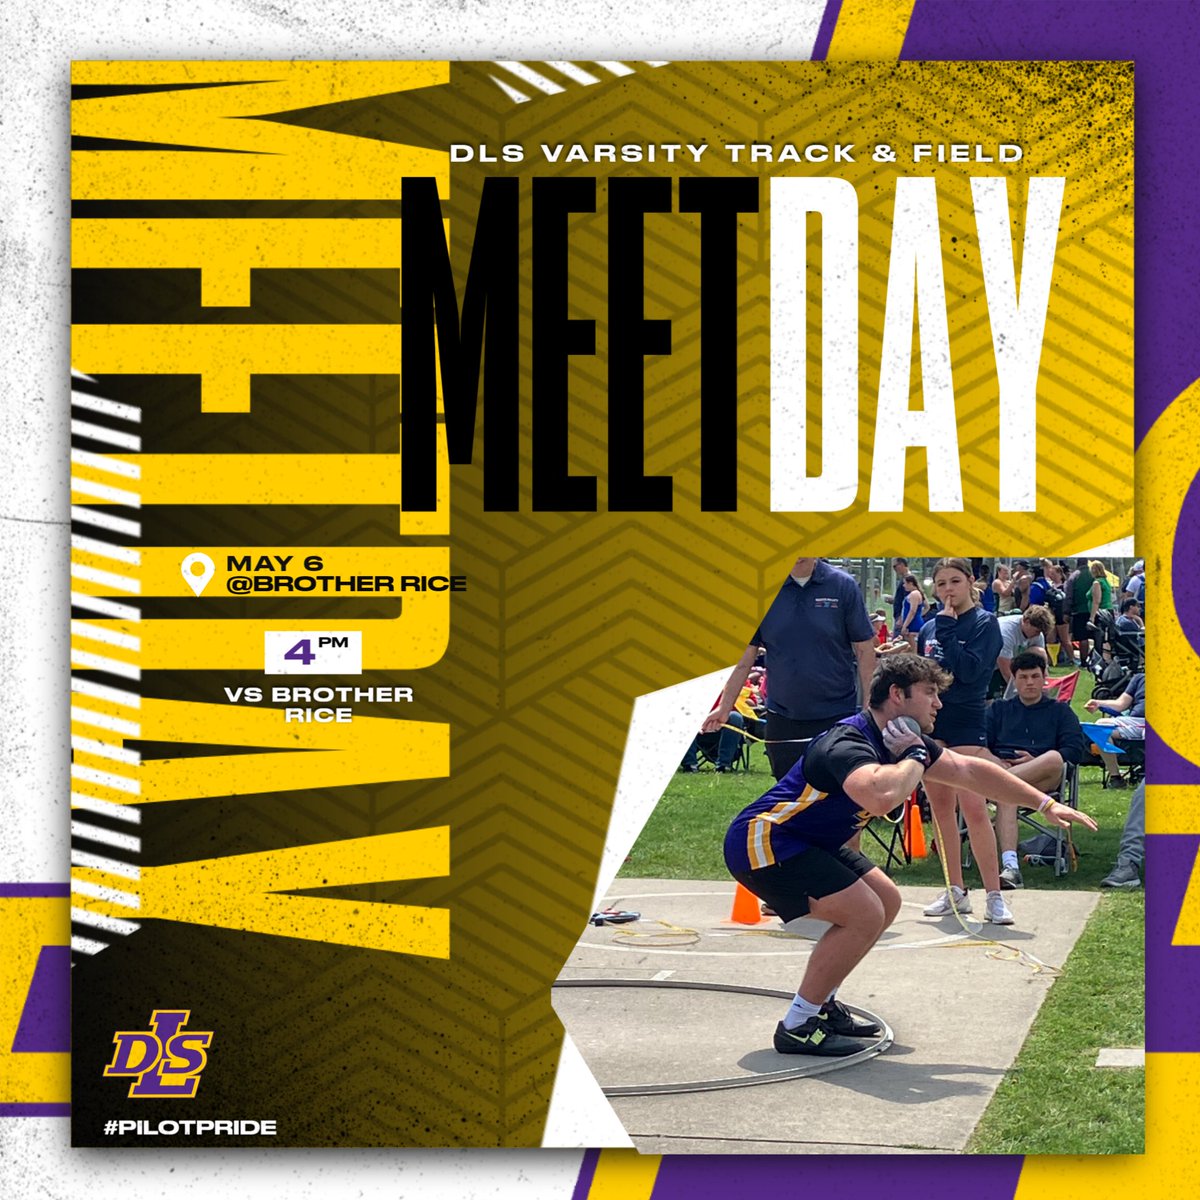 Good luck to DLS Varsity Track & Field who heads to Brother Rice for a meet at 4PM today, May 6. Let’s go, Pilots!

#PilotPride @CHSL1926